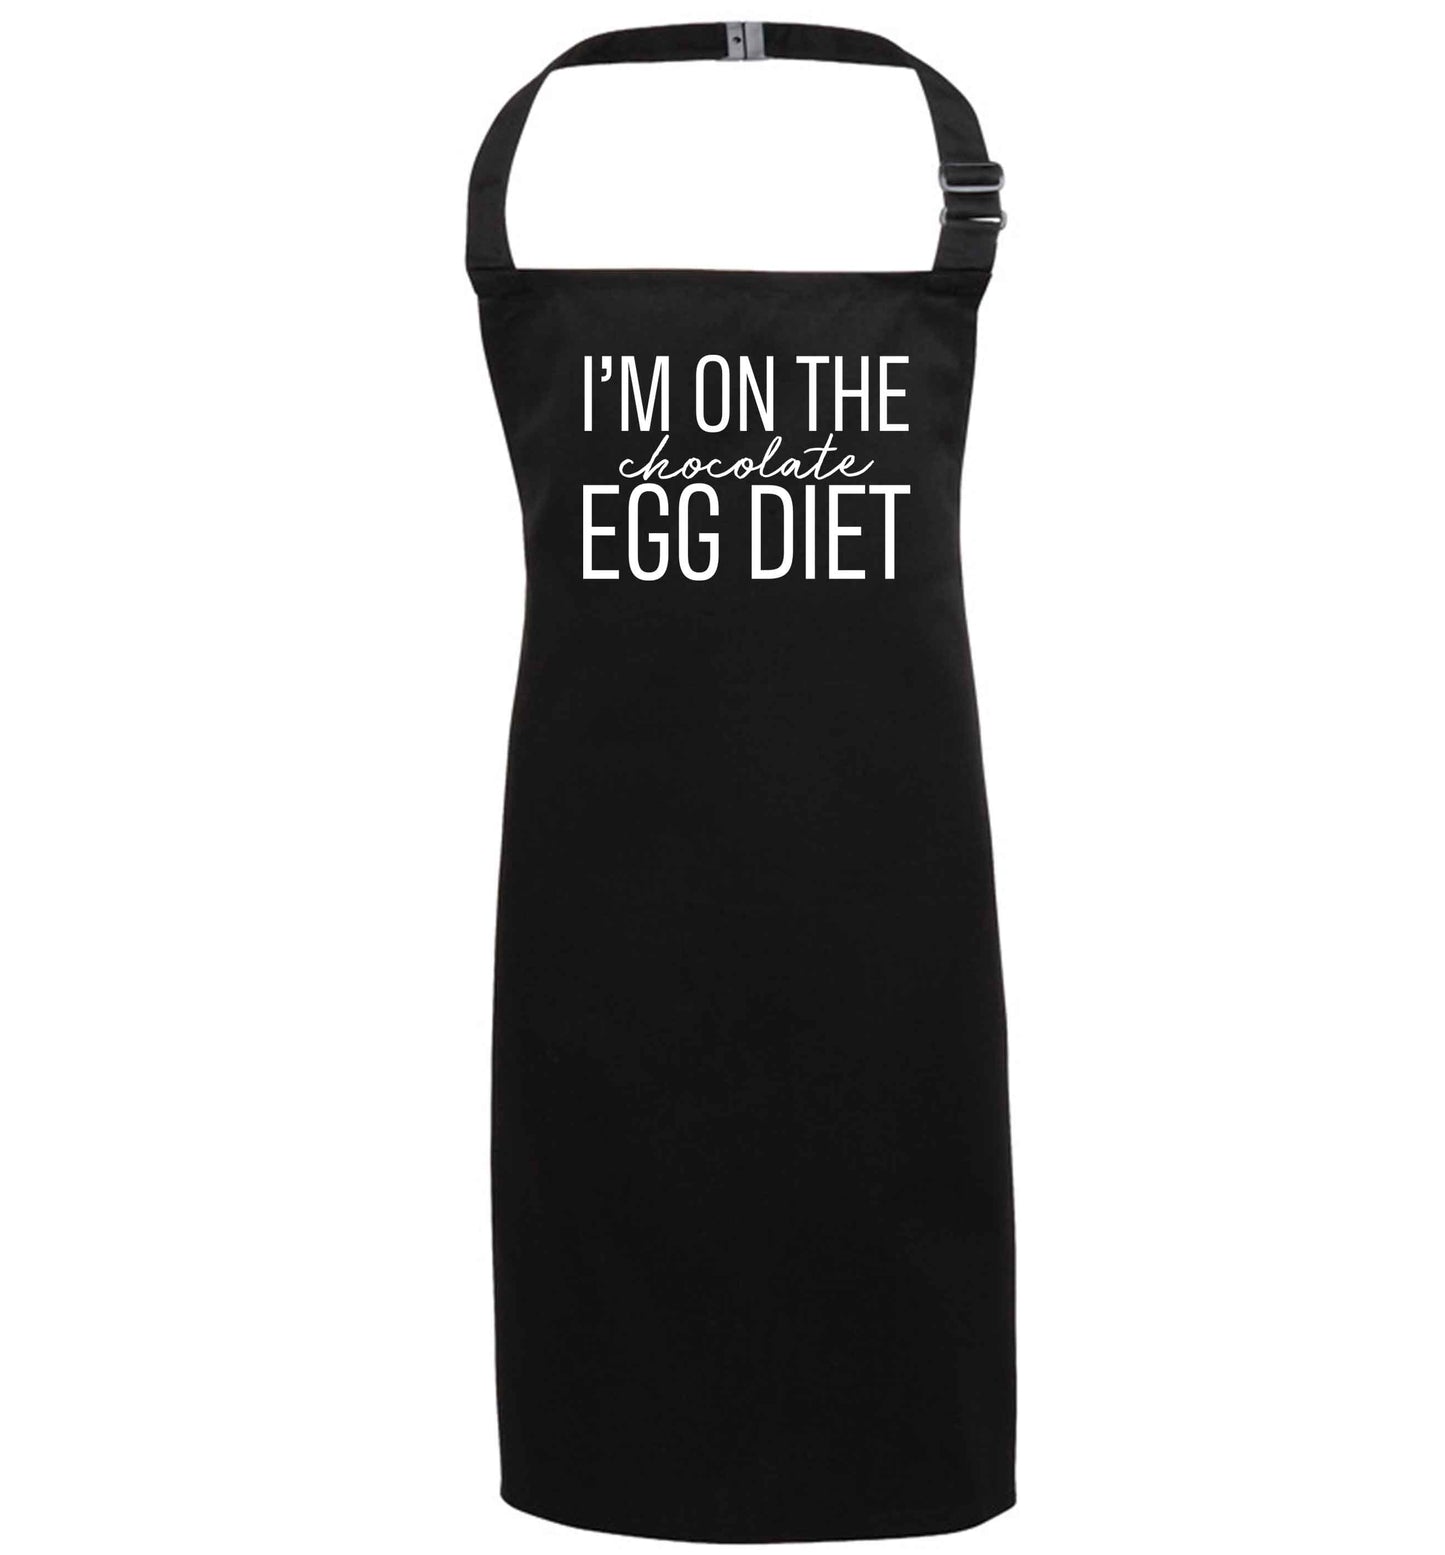 I'm on the chocolate egg diet black apron 7-10 years